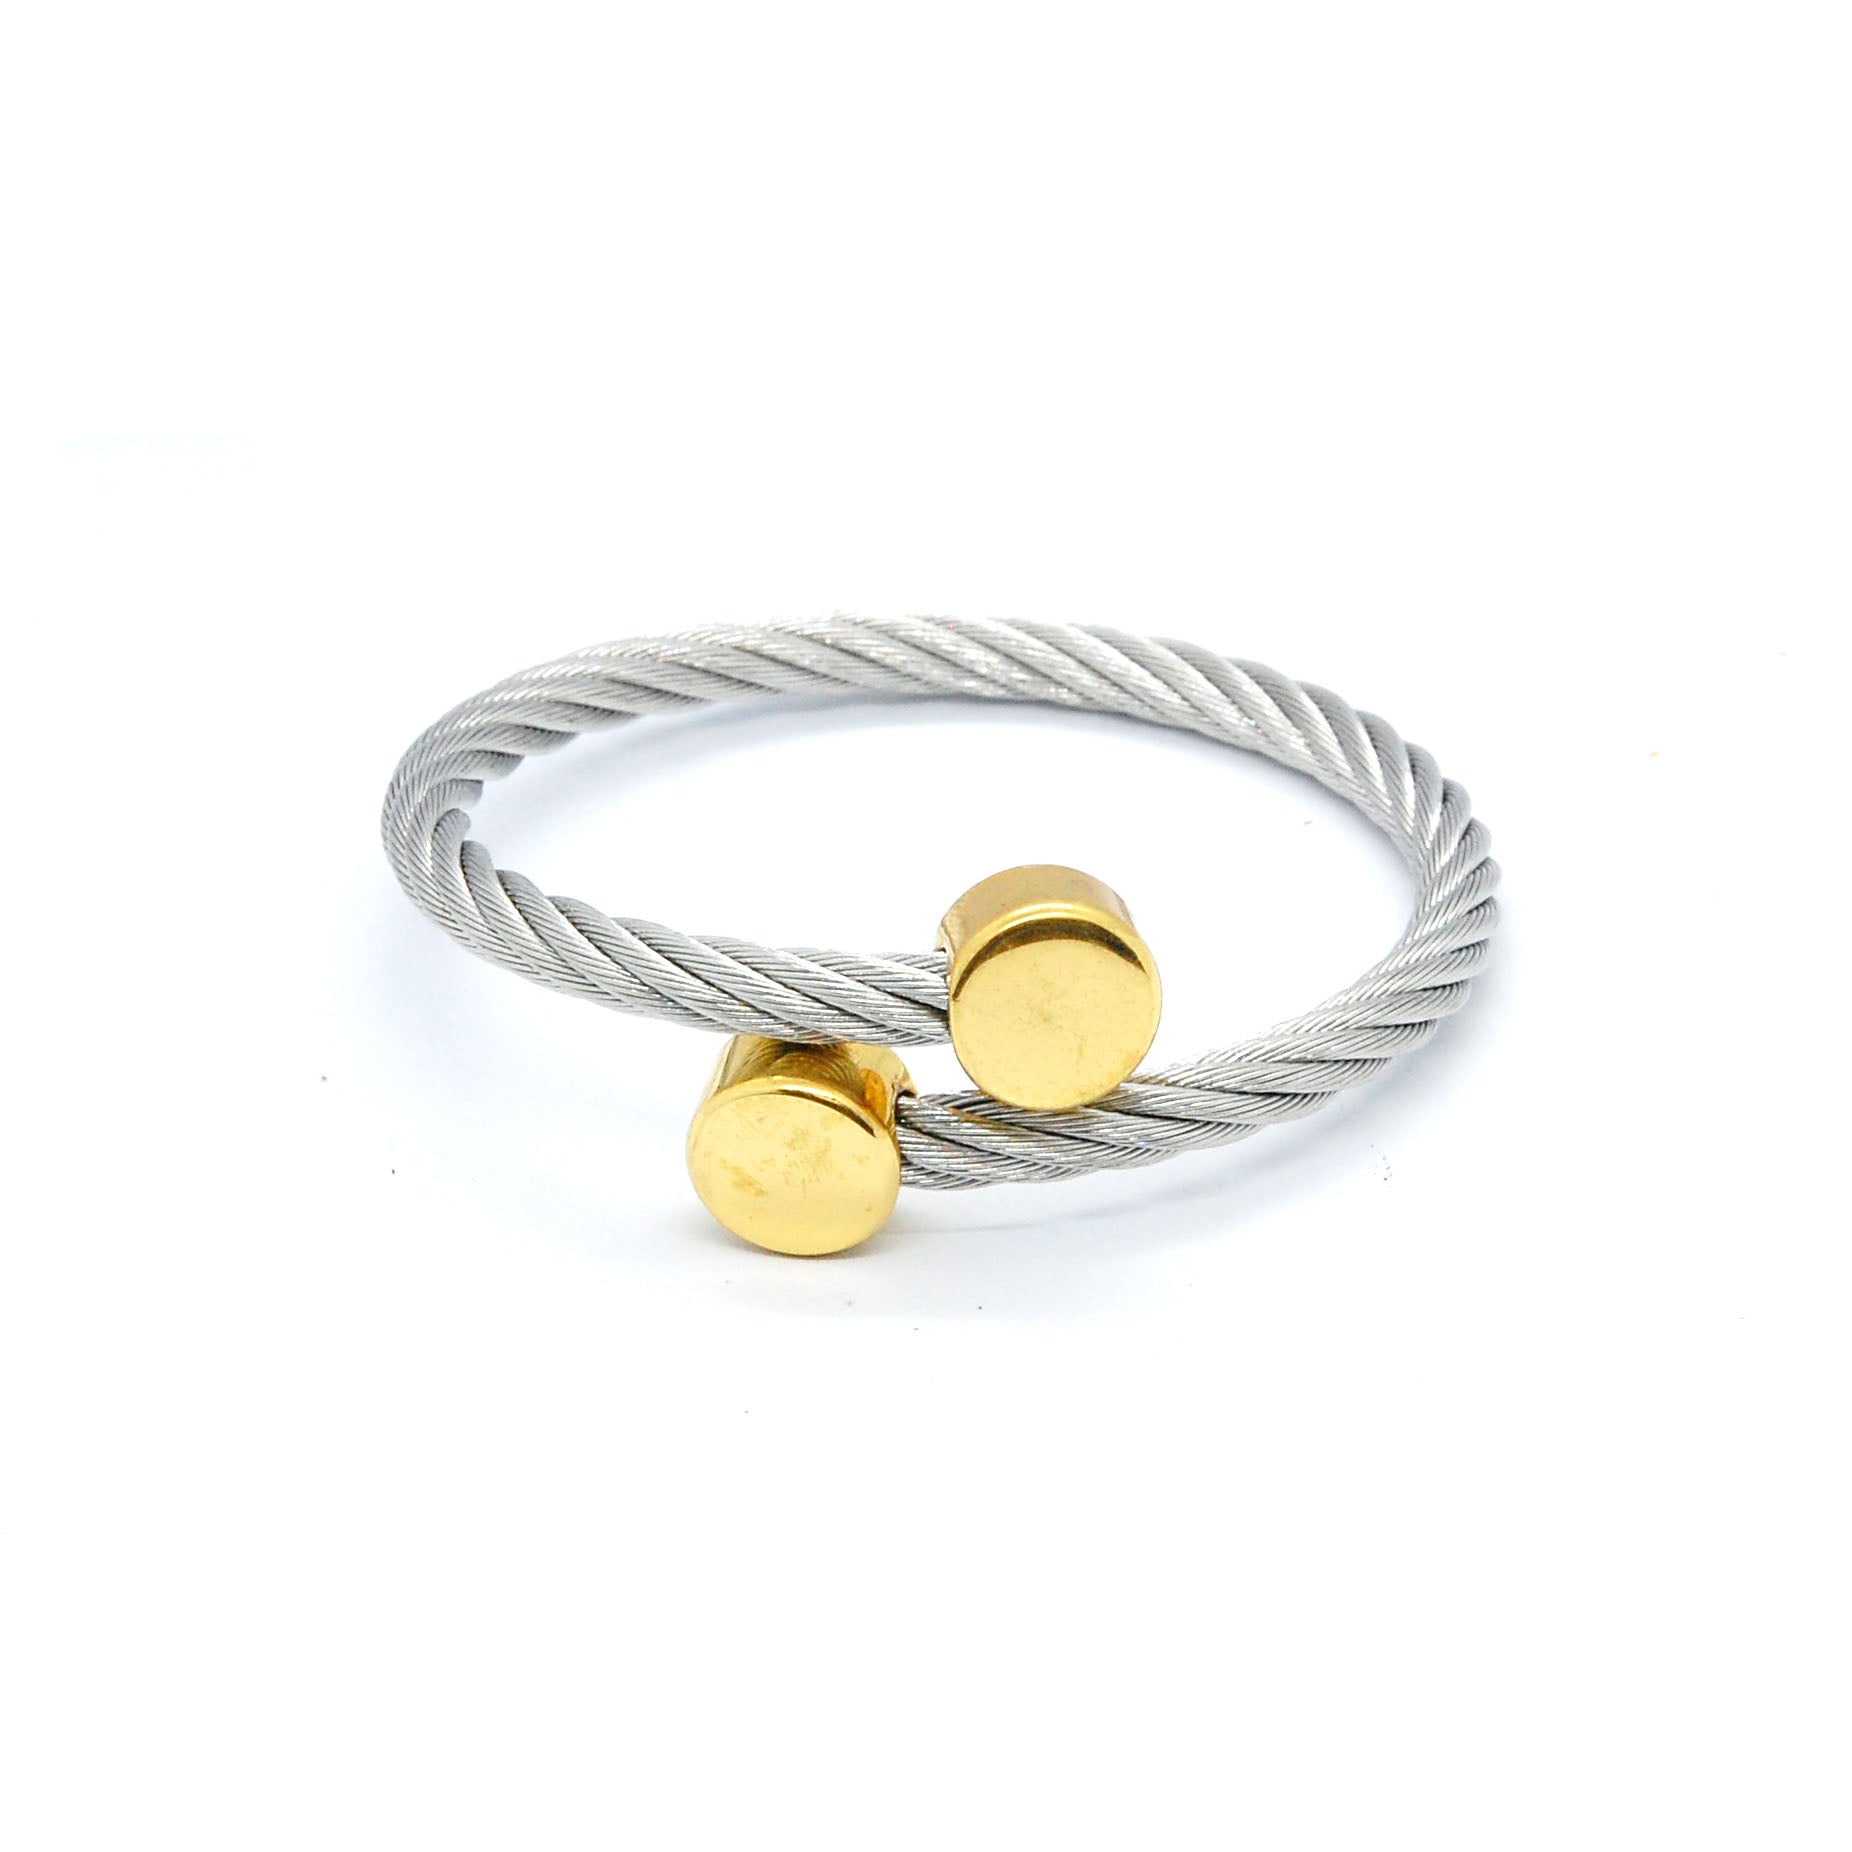 ESBG 7855: Twisted Charriol Bangle w/ Gold Plated Circle Ends